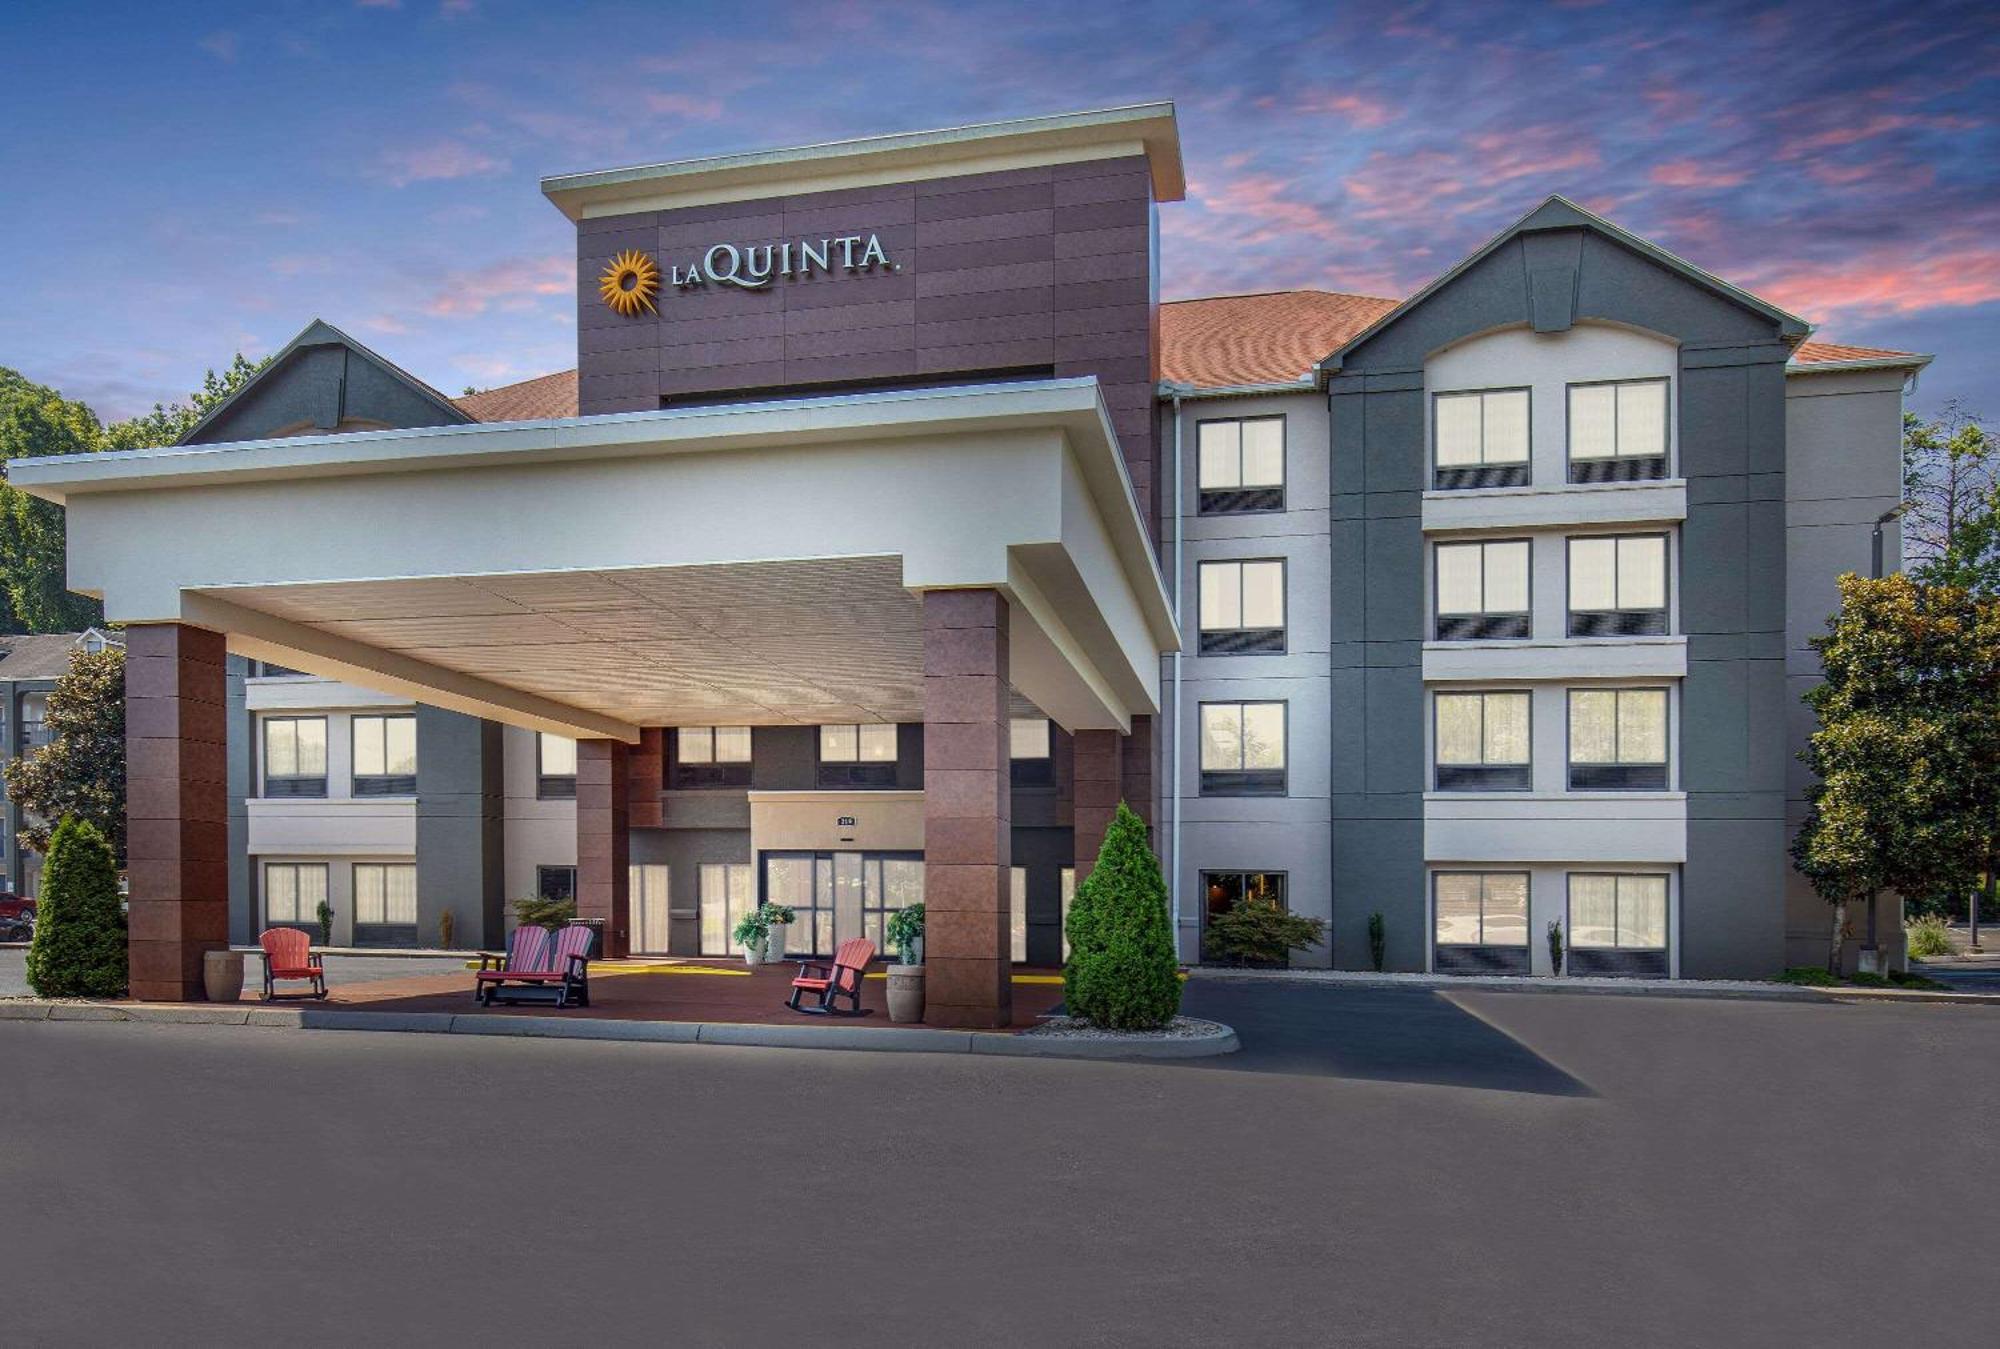 HOTEL LA QUINTA INN BY WYNDHAM PIGEON FORGE-DOLLYWOOD PIGEON FORGE, TN 3*  (United States) - from £ 78